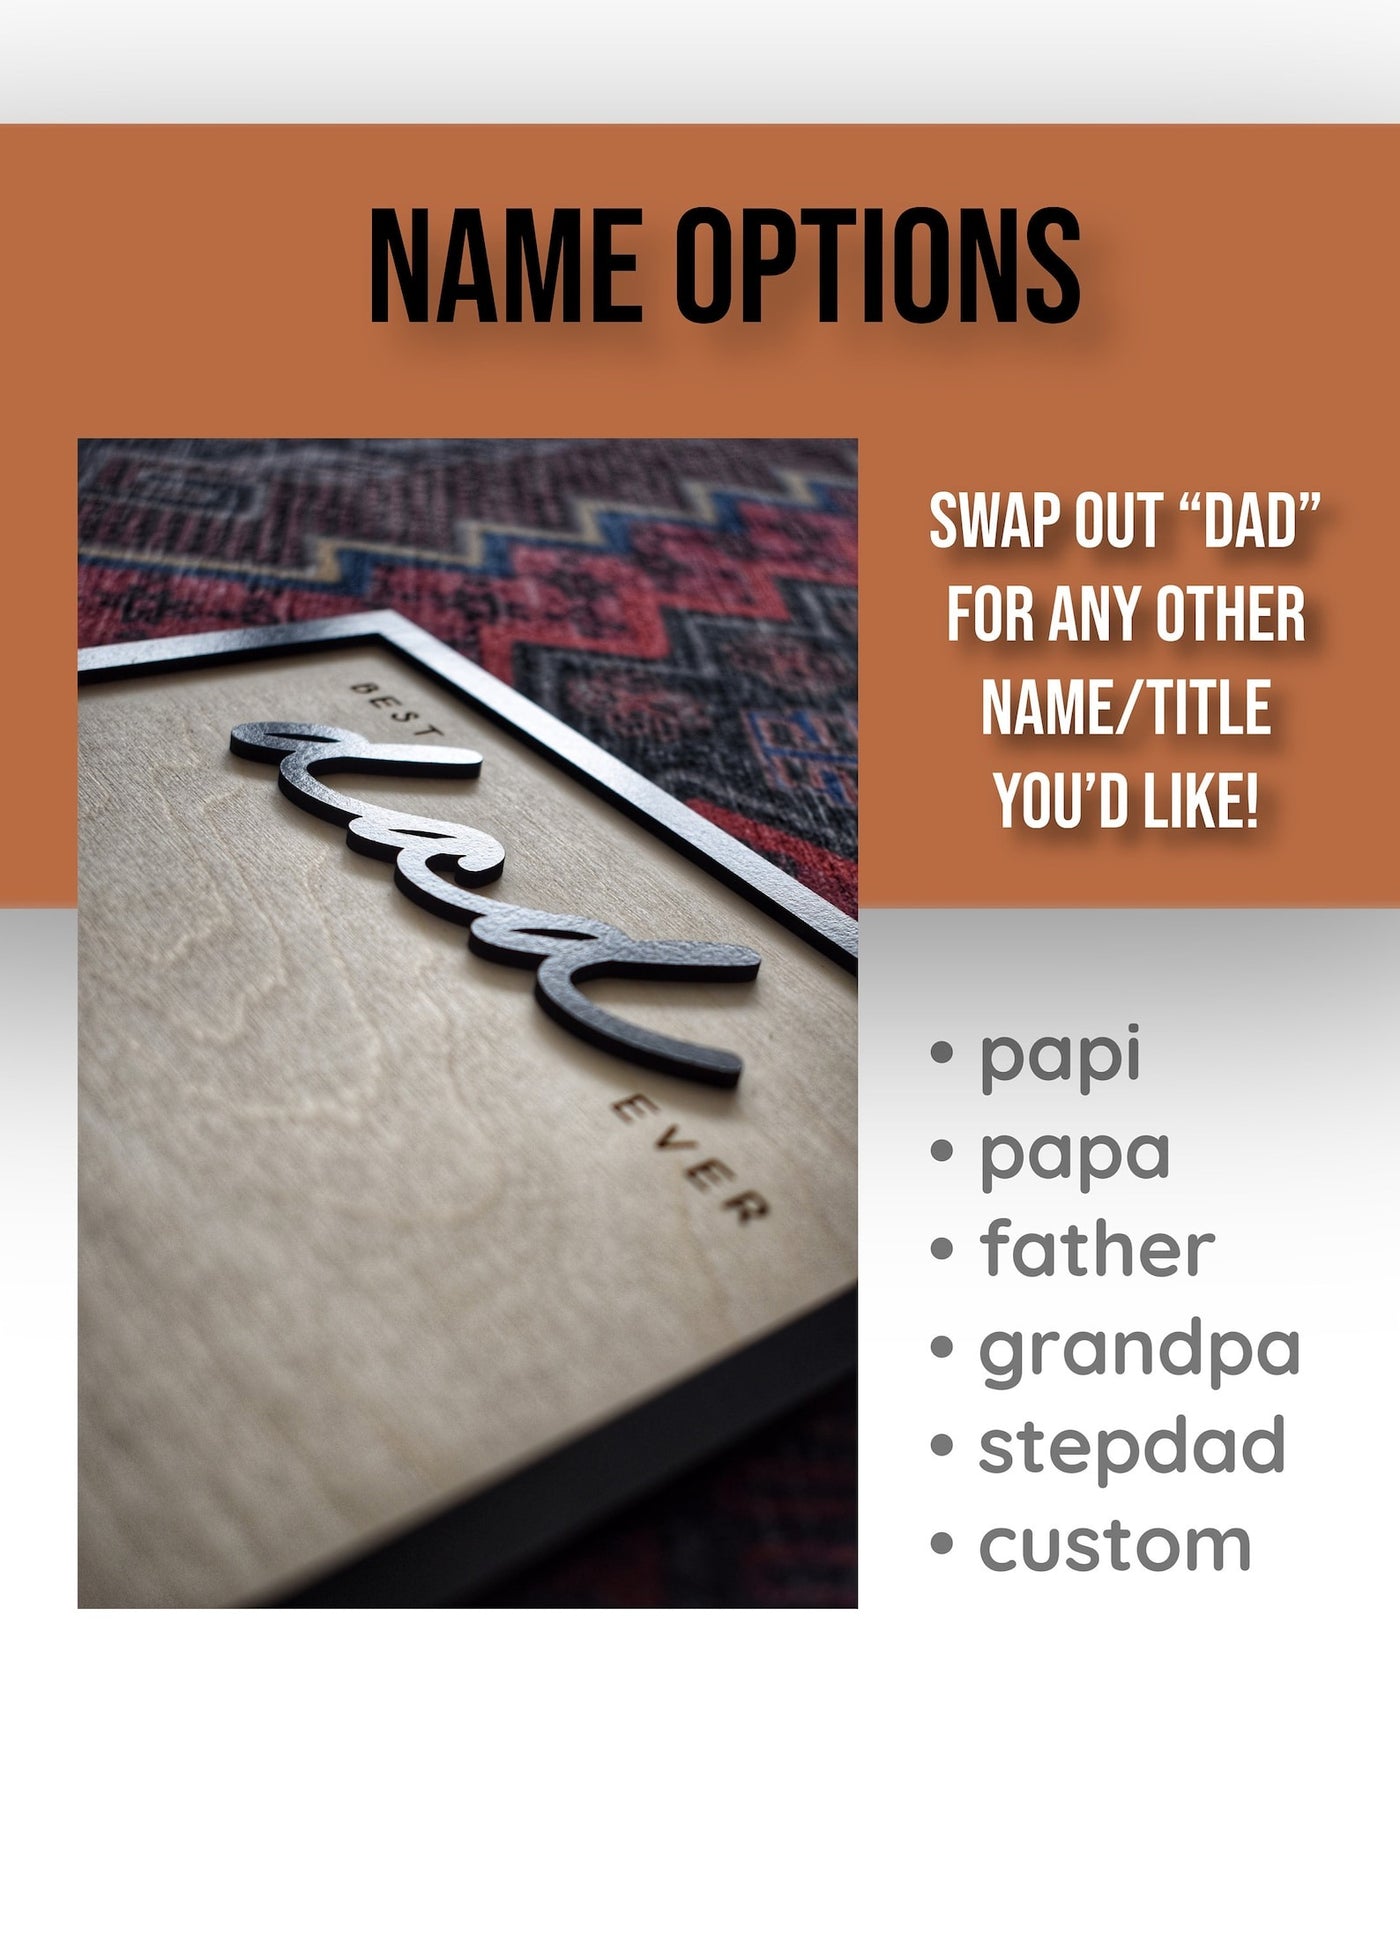 Hands Down Best Dad Ever, Personalized Engraved Wooden Sign, Celebrate Dad with Handprints and Custom Message, Handmade Fathers Day Gift